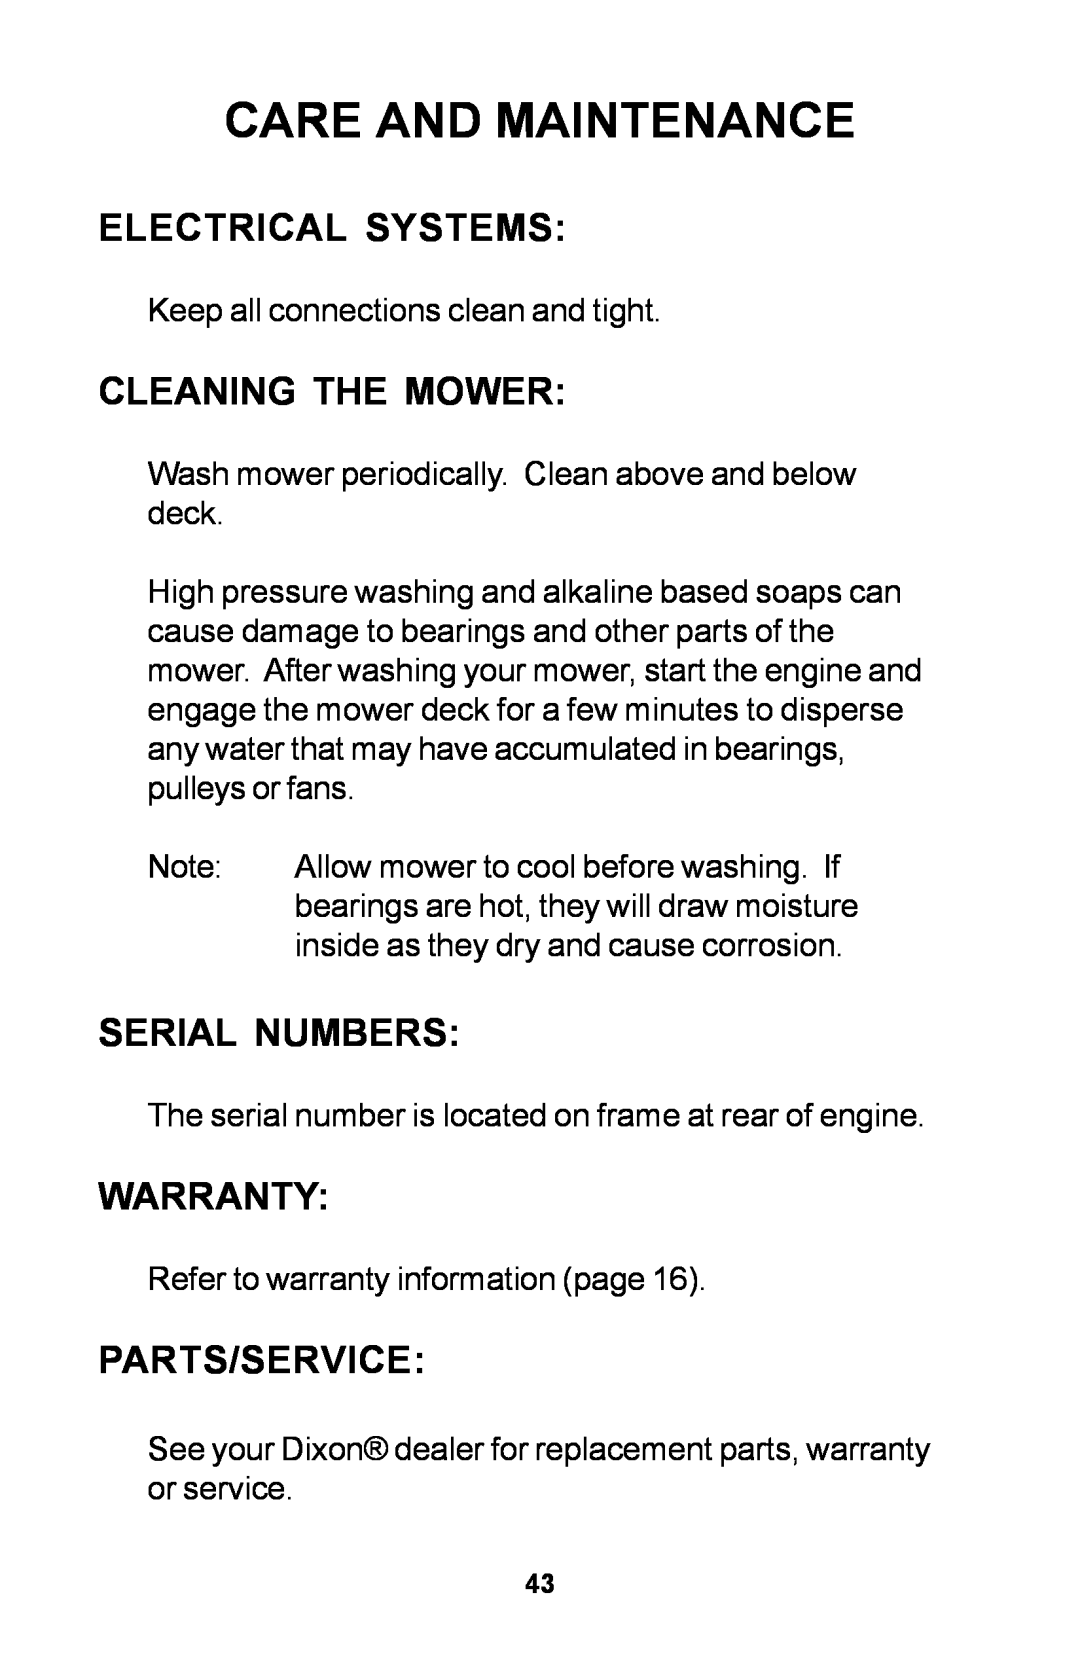 Dixon 30 manual Electrical Systems, Cleaning The Mower, Serial Numbers, Warranty, Parts/Service, Care And Maintenance 